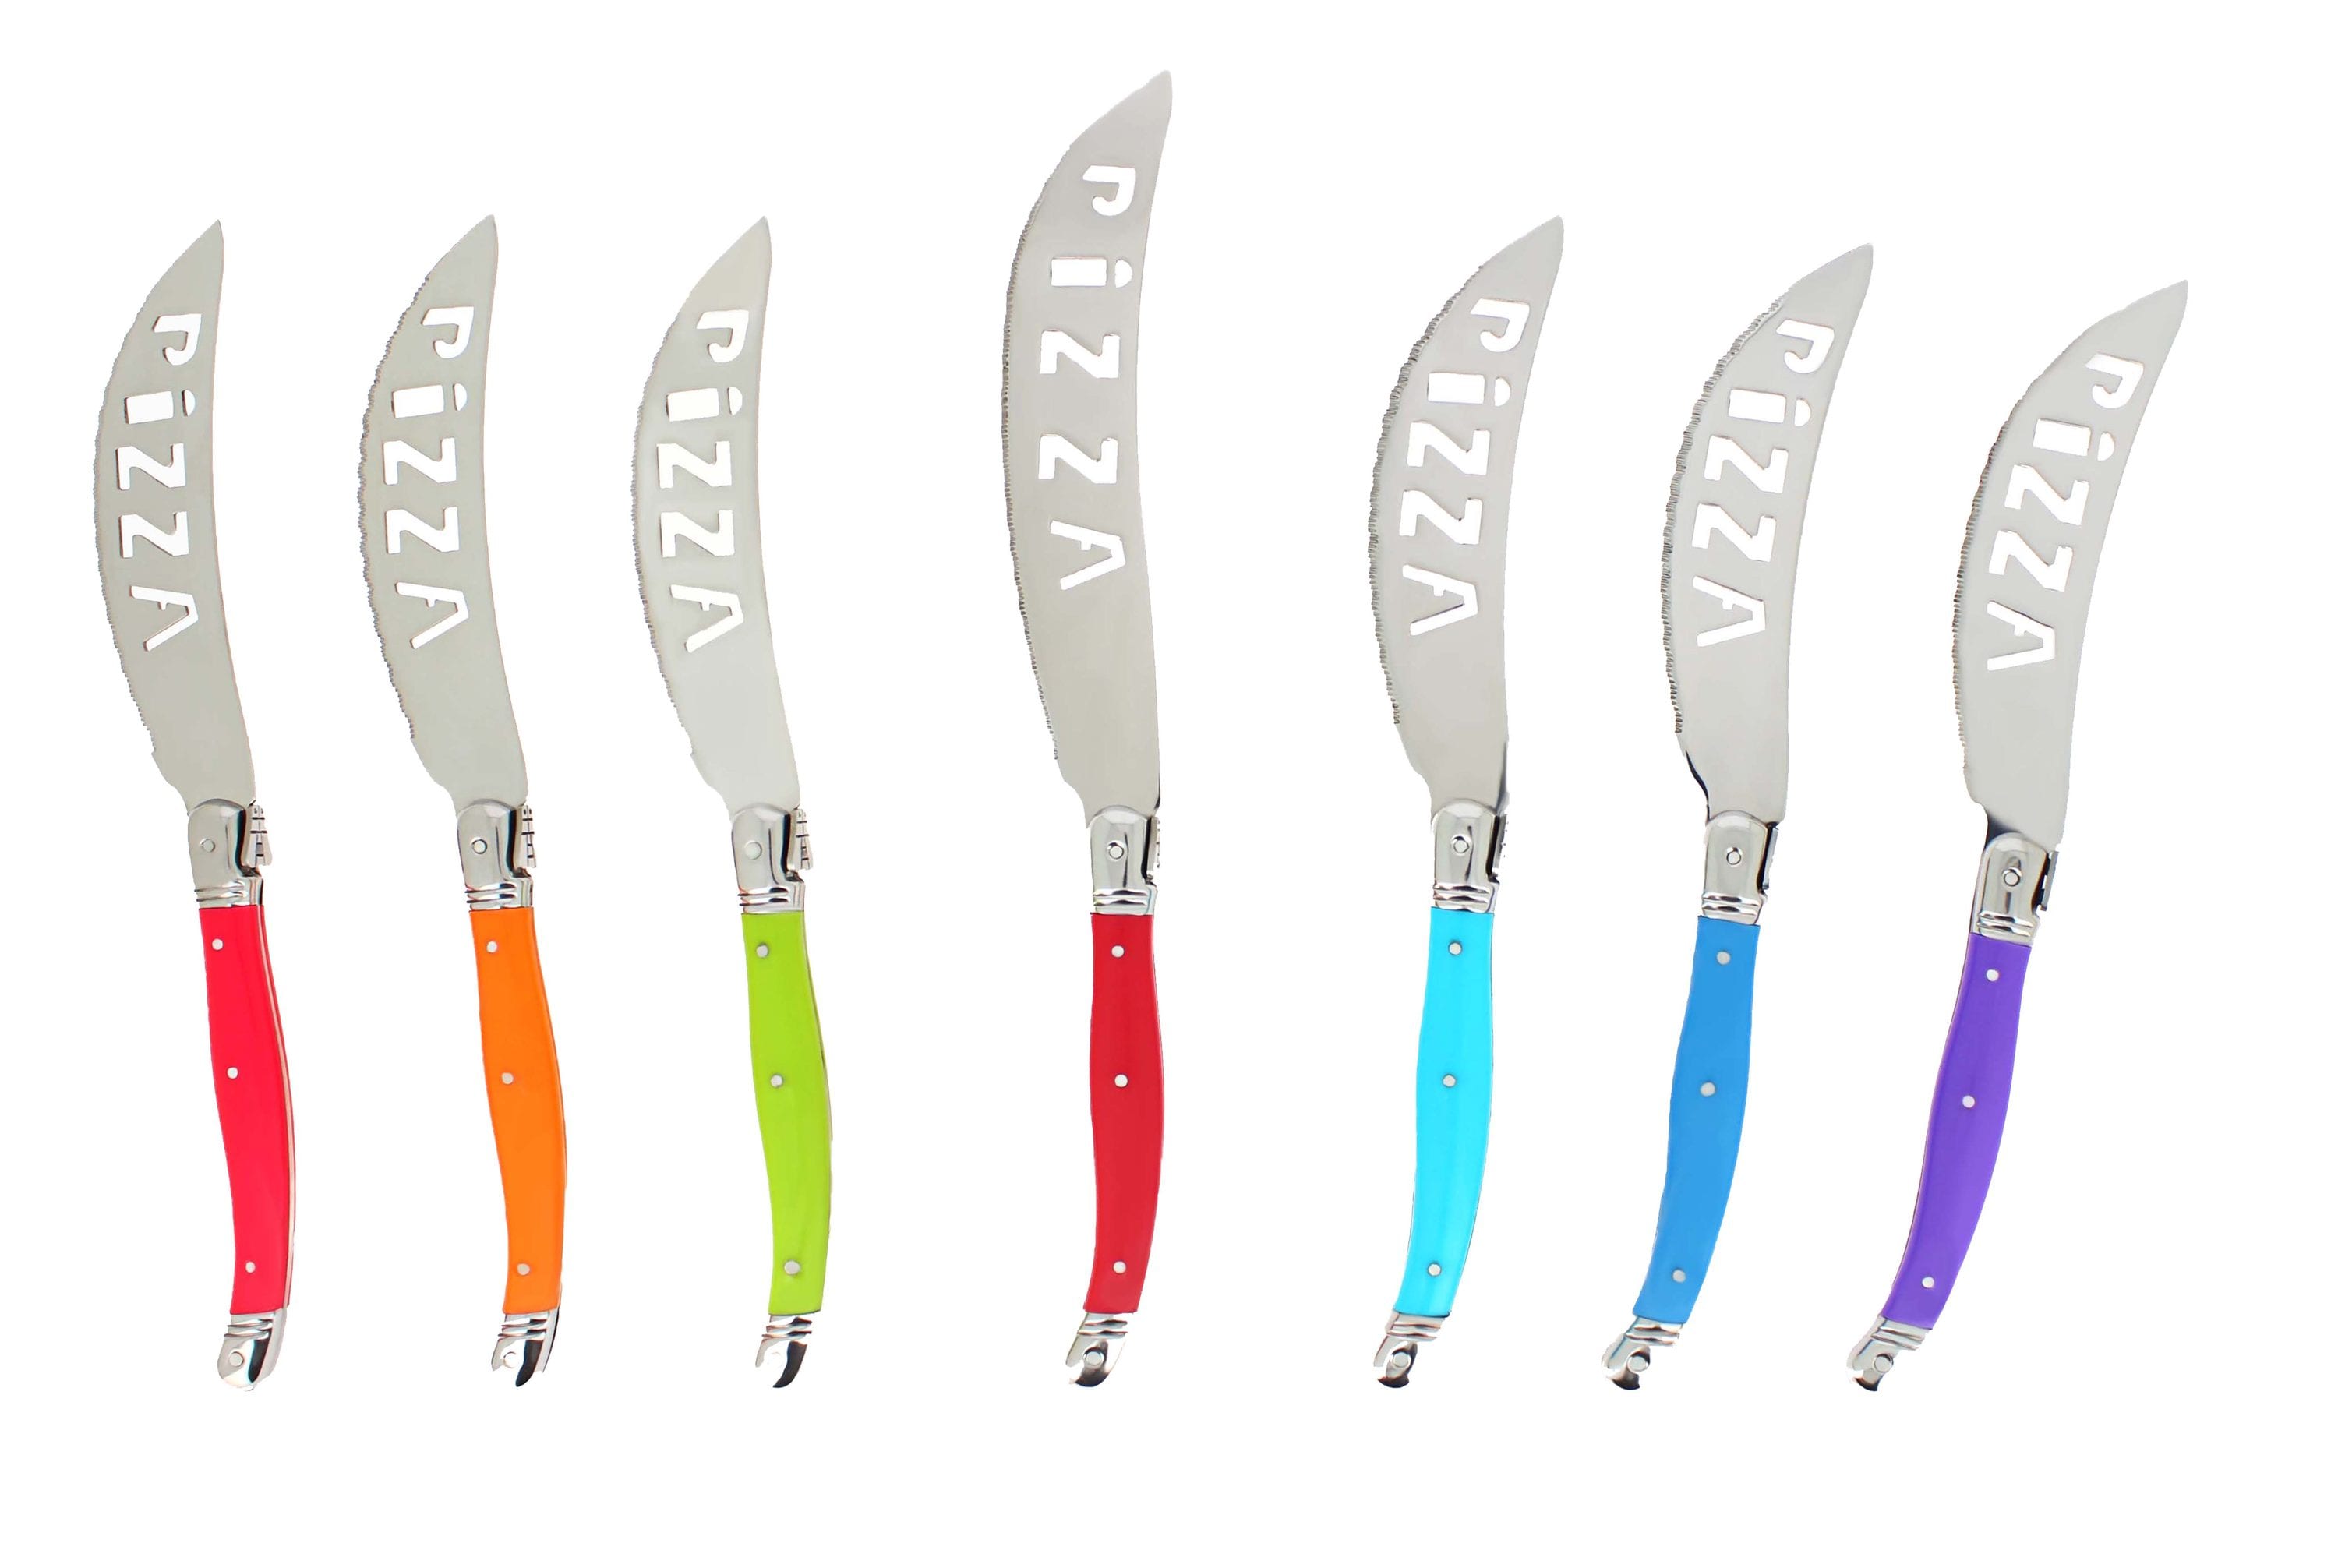 French Home Set of 4 Laguiole Faux Turquoise Steak Knives - Blue